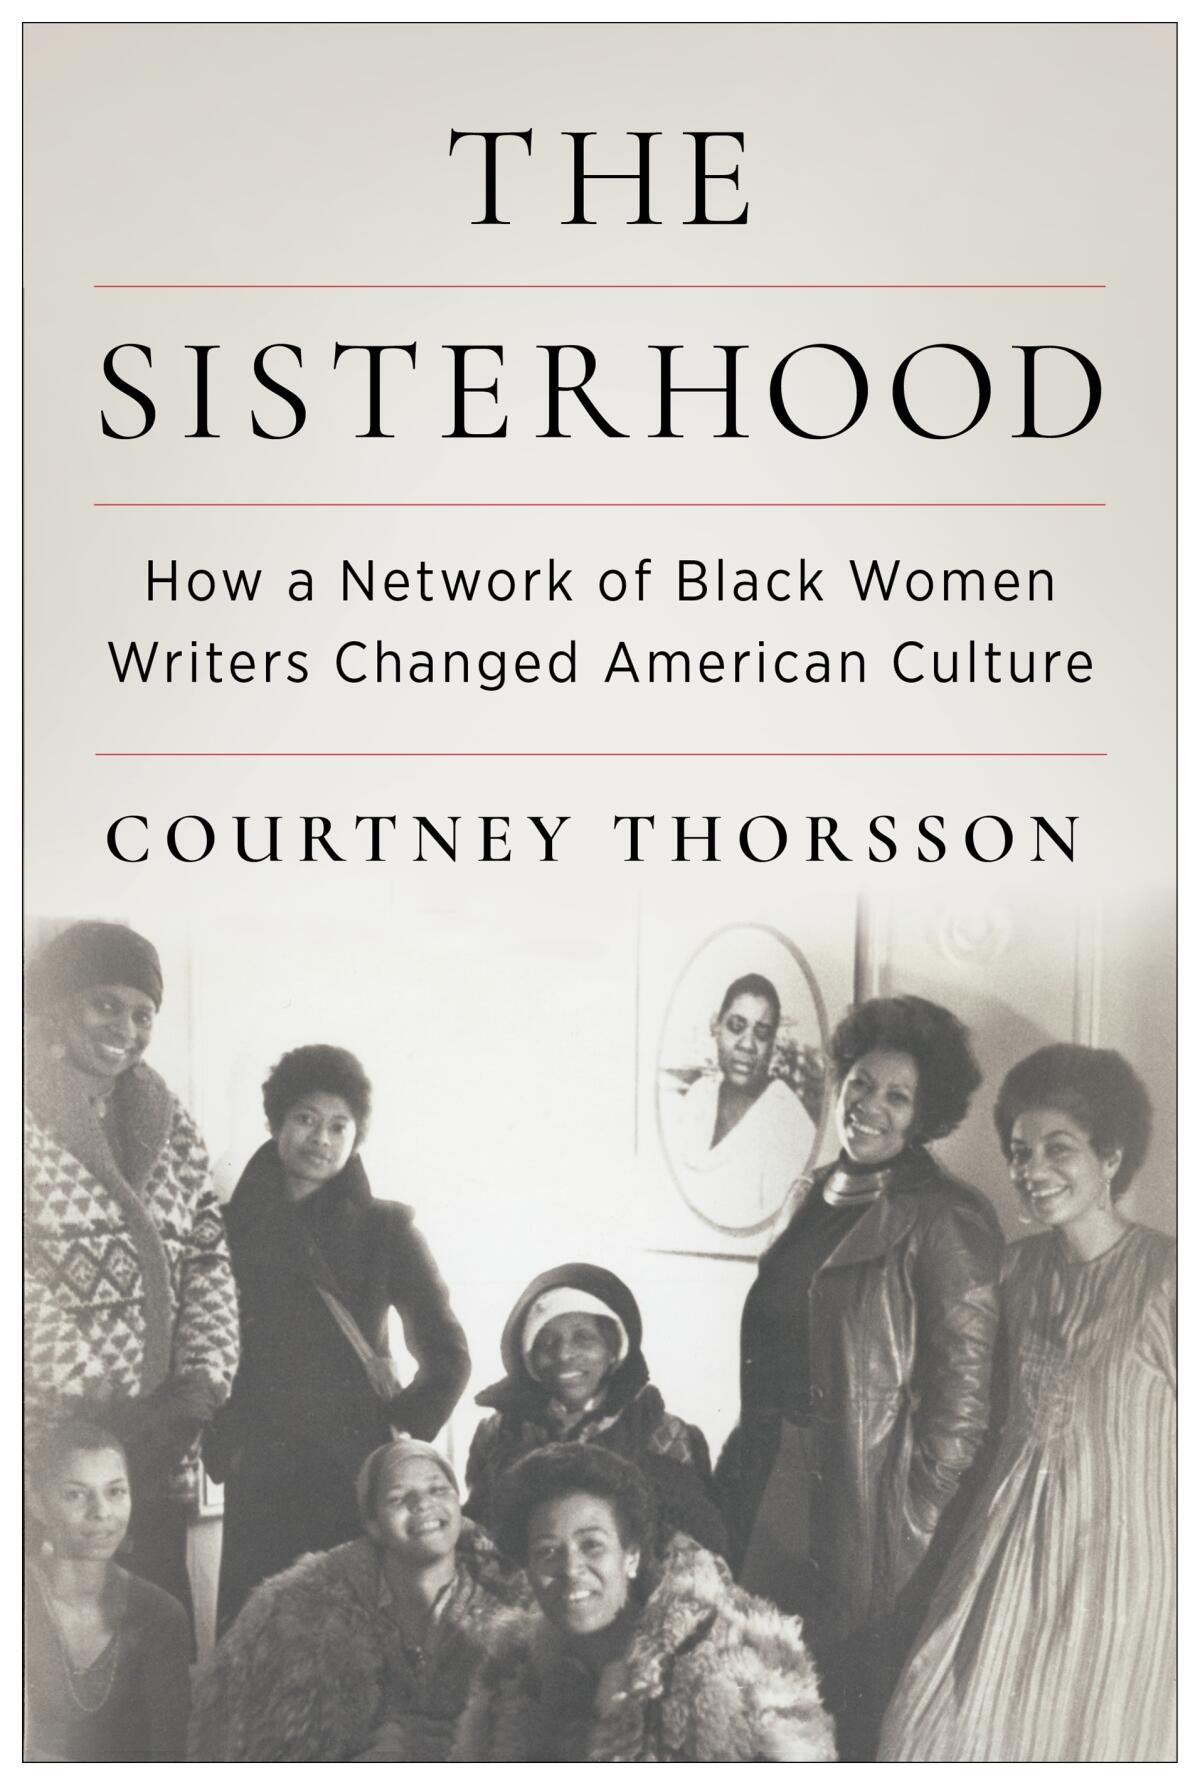 "The Sisterhood," by Courtney Thorsson